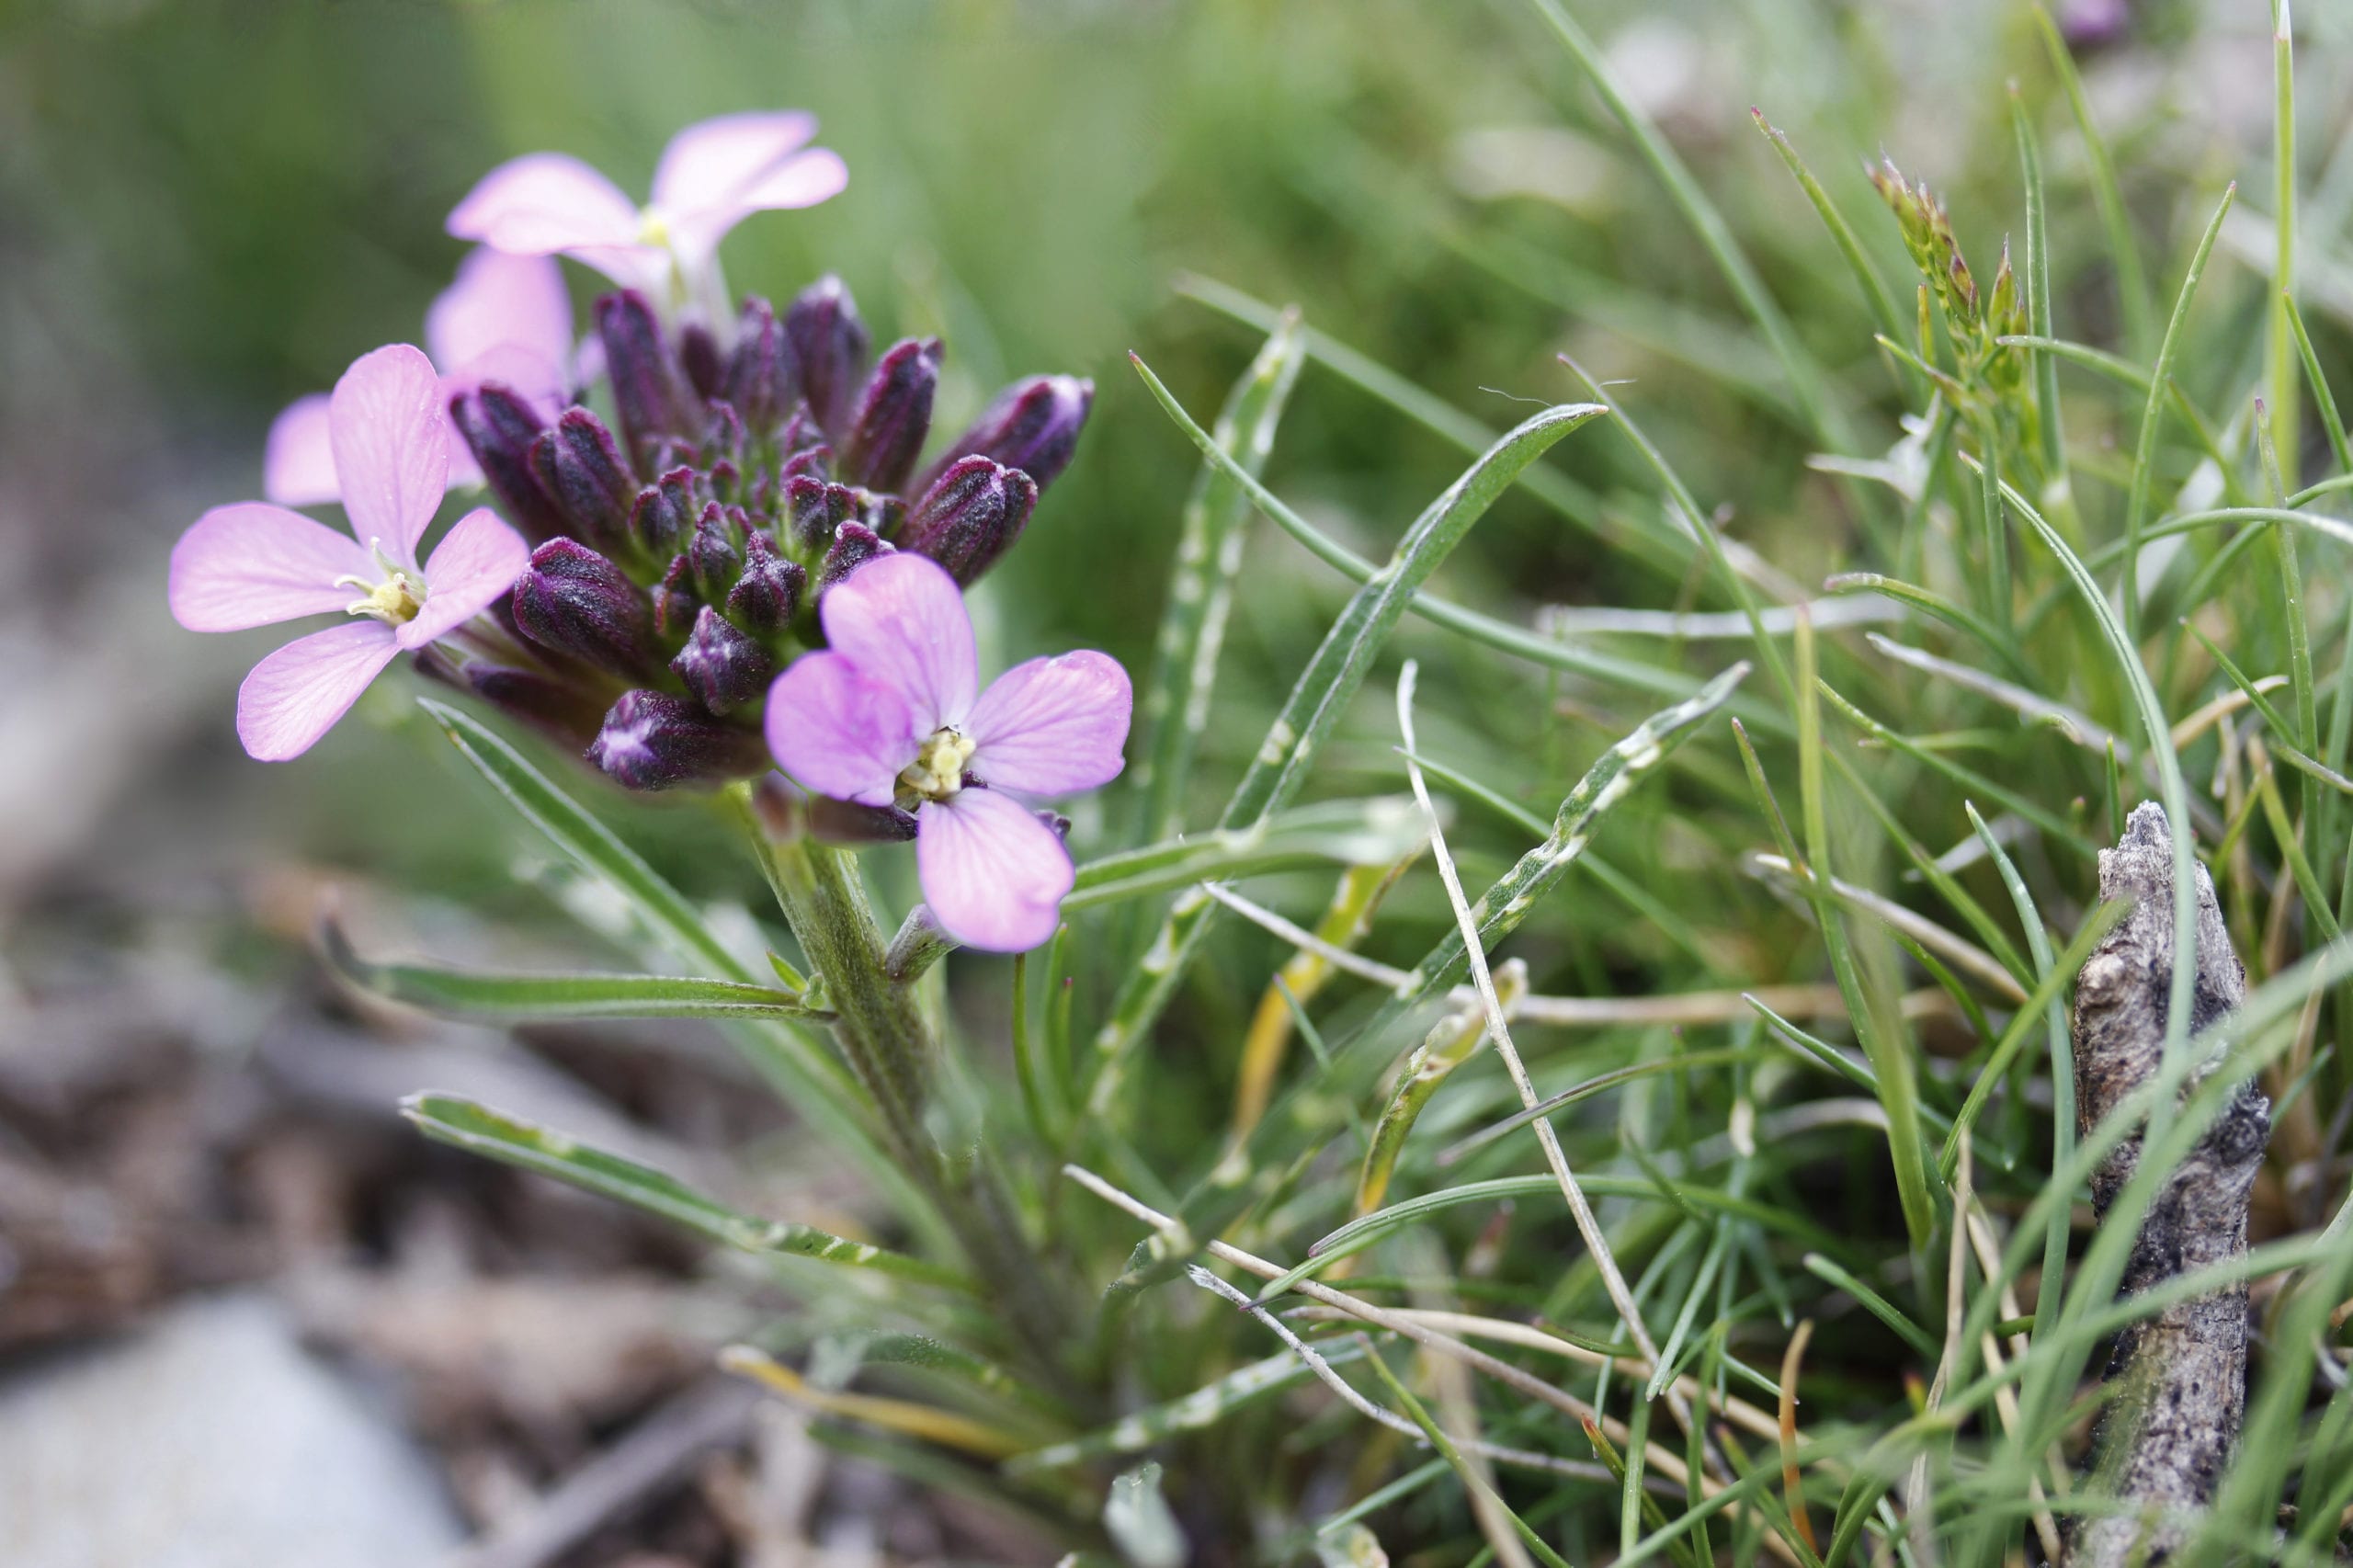 A close up picture of Erysimum baeticum, a wallflower from the Sierra Nevada mountains in Spain. On the left side of the picture are the purple flowers with four petals each, underneath of which is visible damage to its leaves caused by local insects. On the right side is grass and a twig.